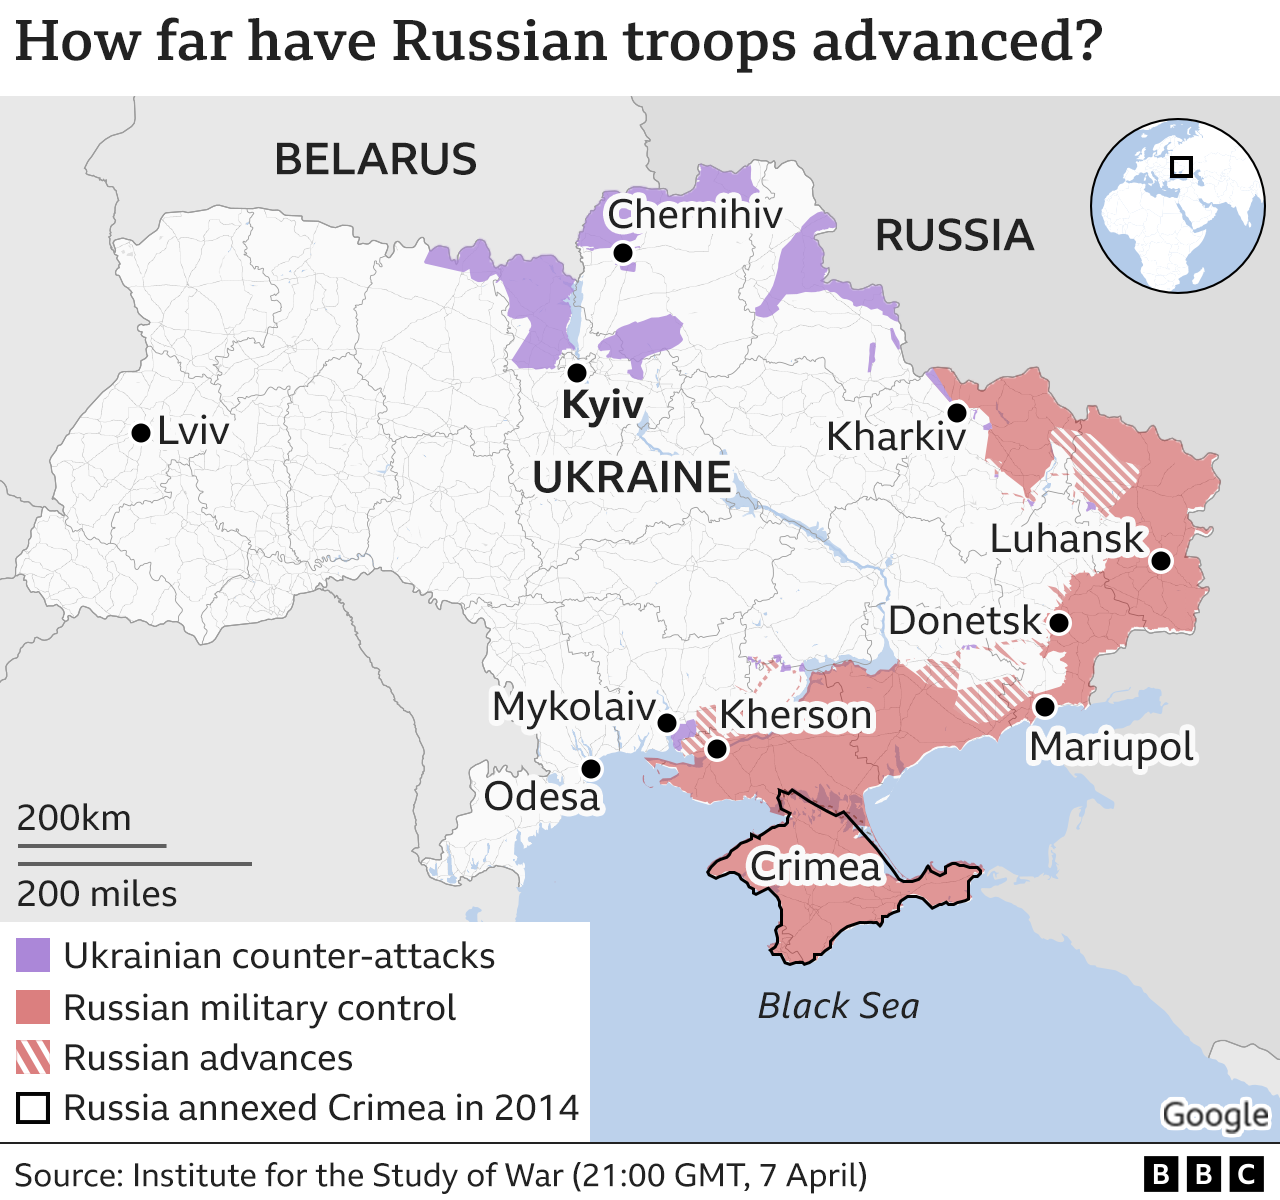 Map showing areas under Russian control and areas retaken by Ukrainian counter-attacks.